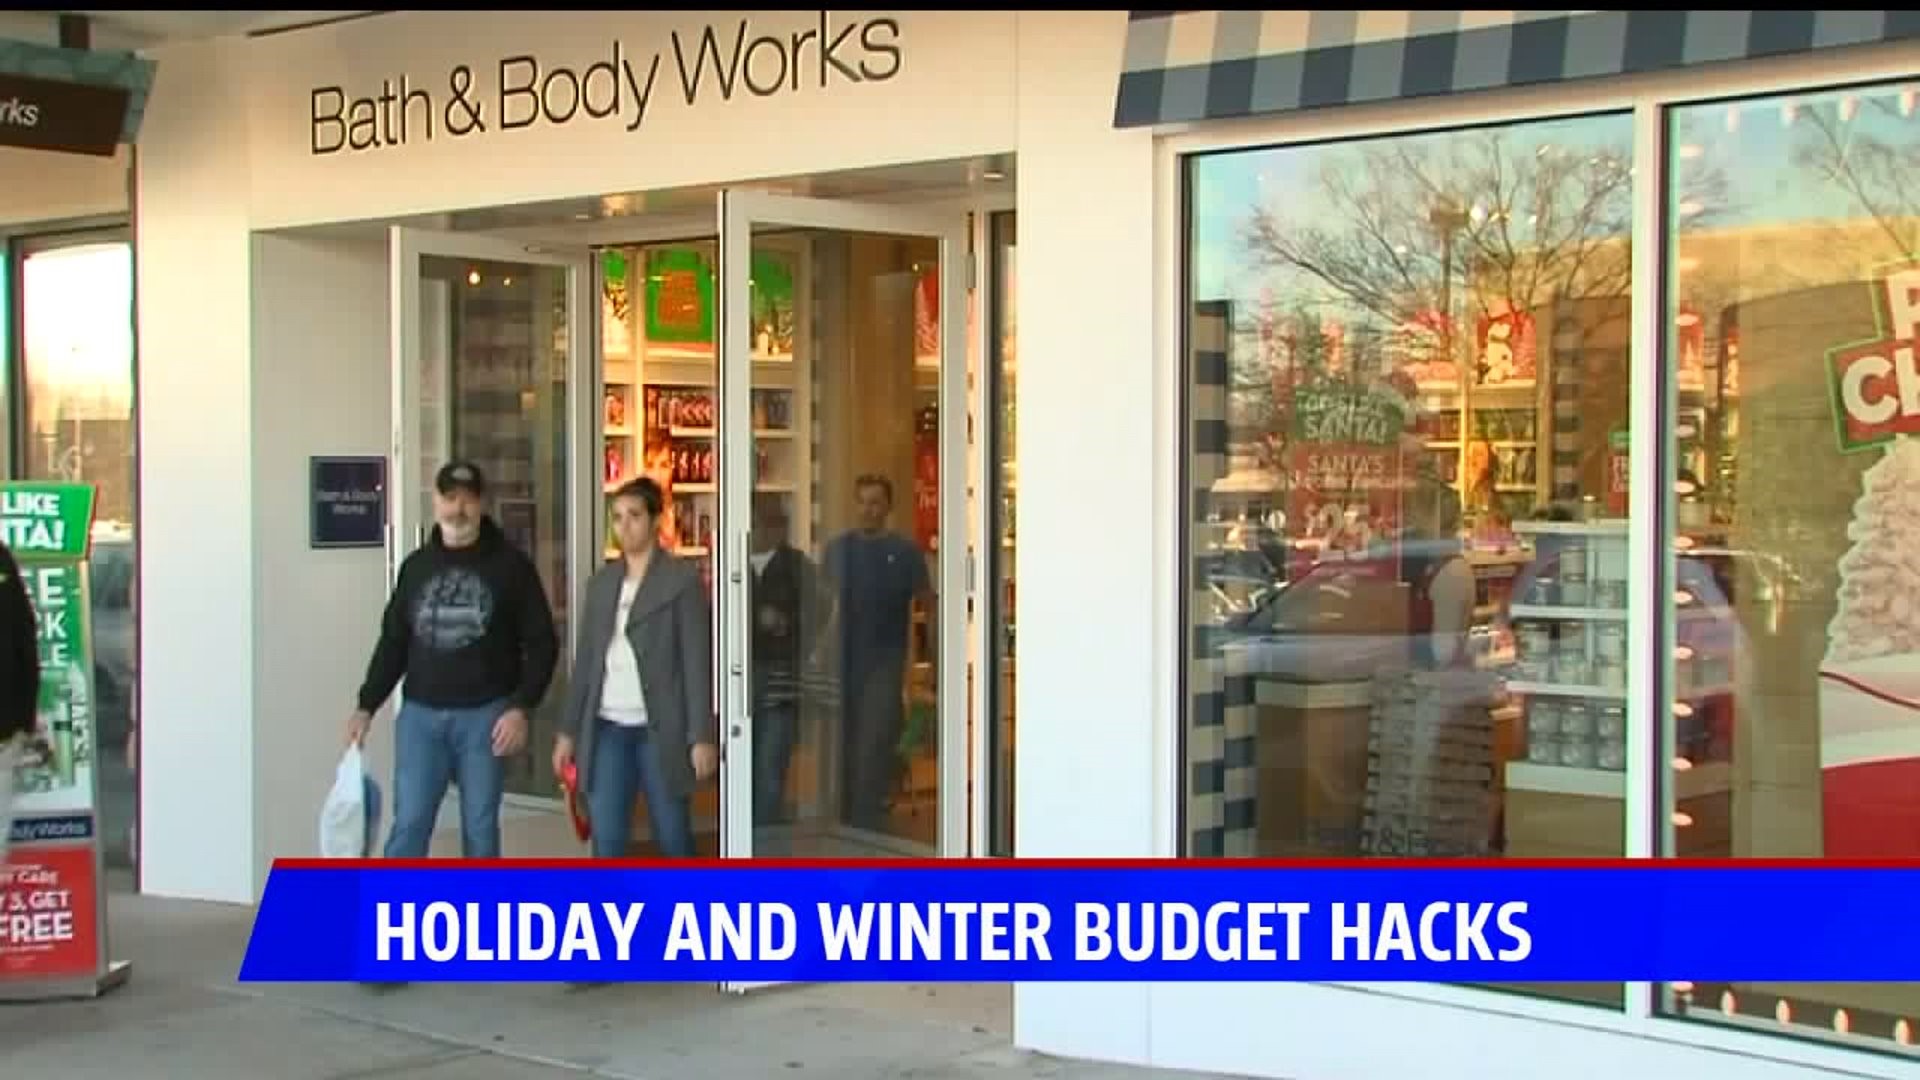 Setting a budget and sticking to it this holiday season